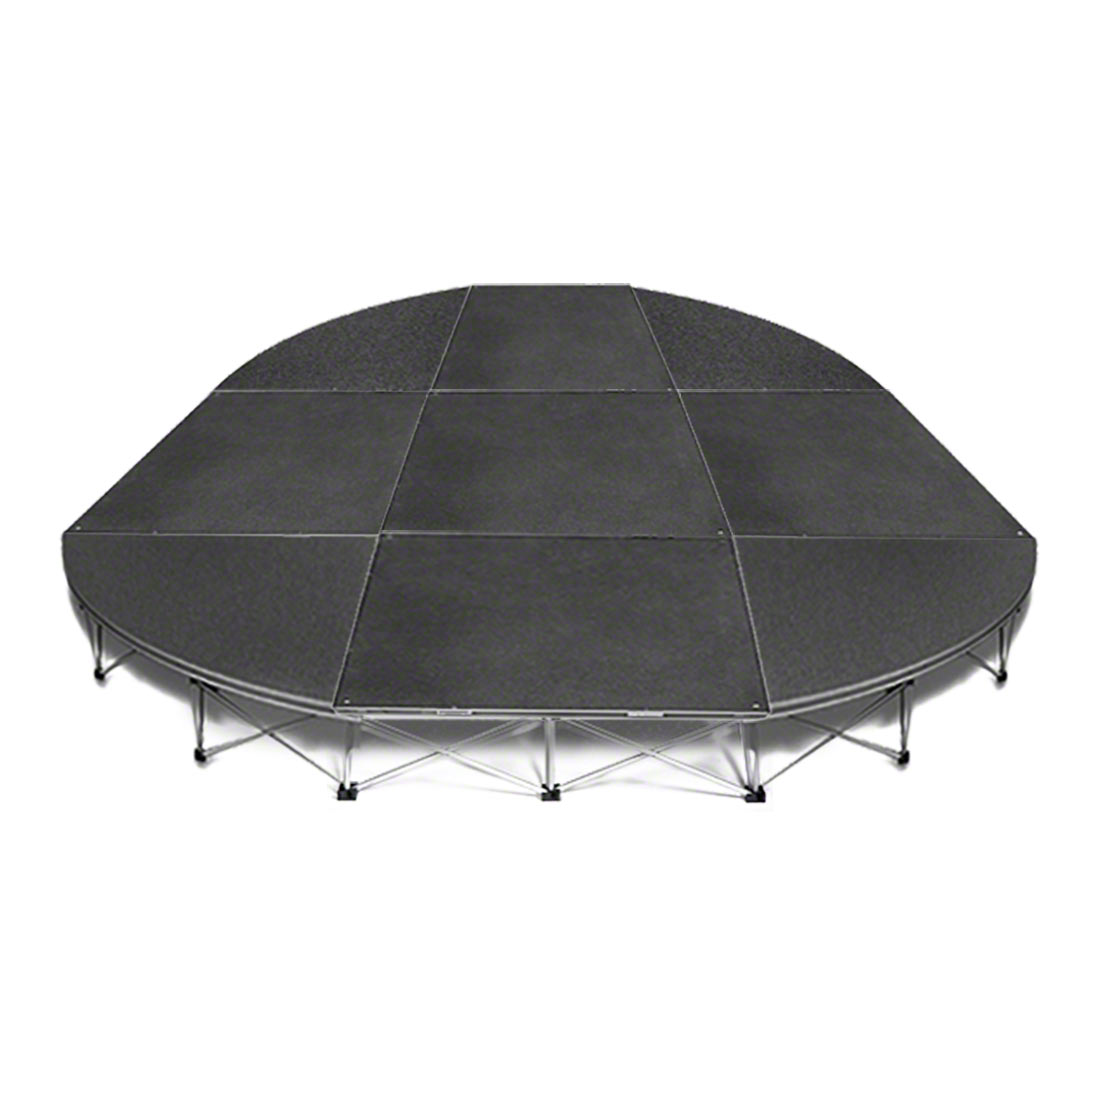 Intellistage 12 Rounded Corner Portable Stage Stagedrop